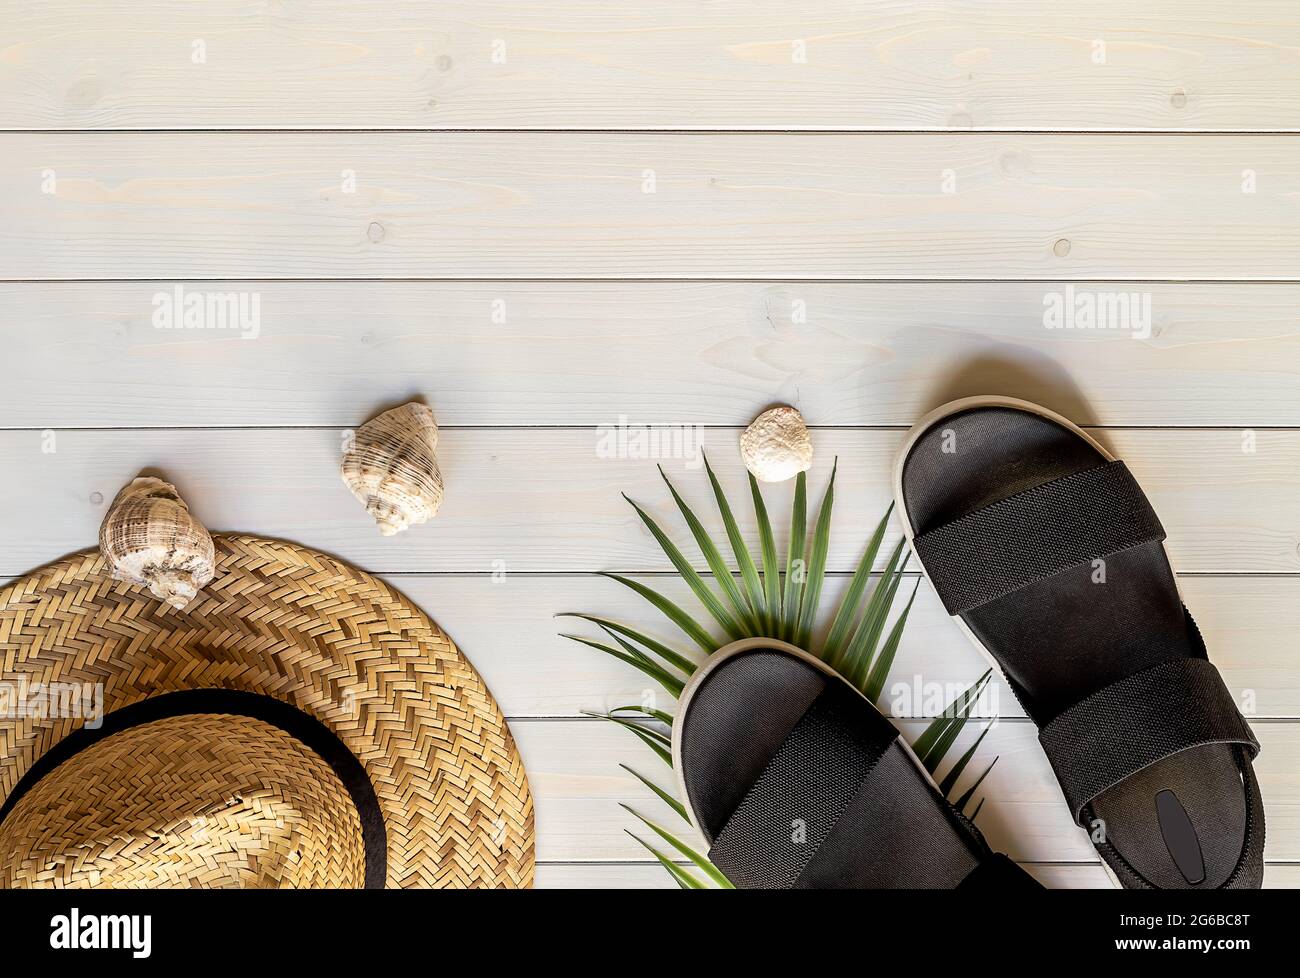 Women's open-toe black sandals from recycled plastic fibers, straw hat, and seashells  Stock Photo